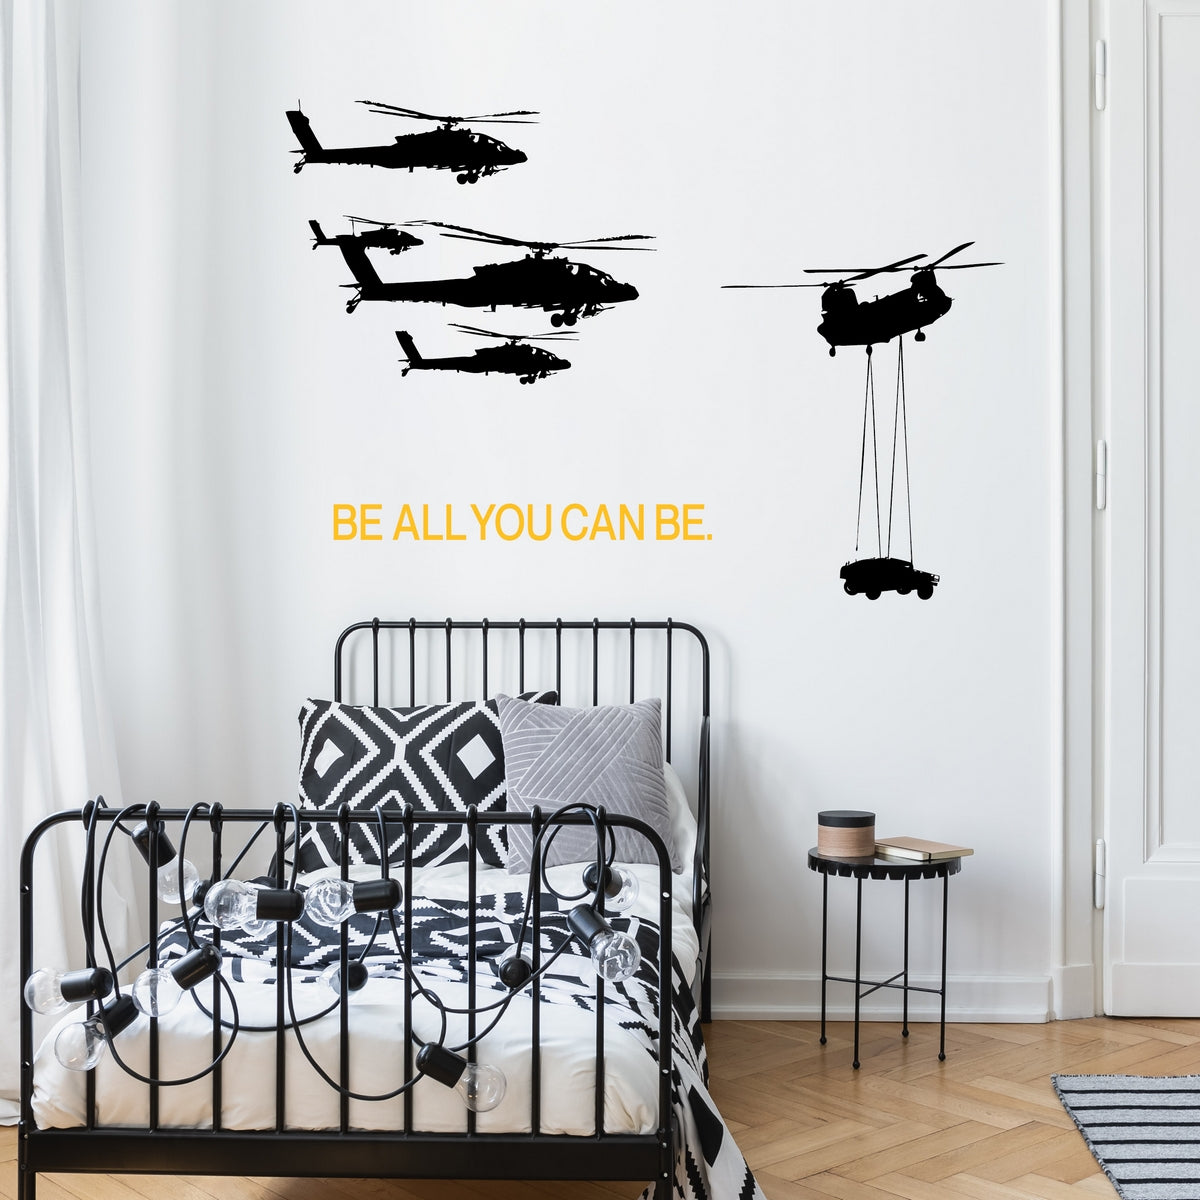 U.S. Army Military Wall Decals